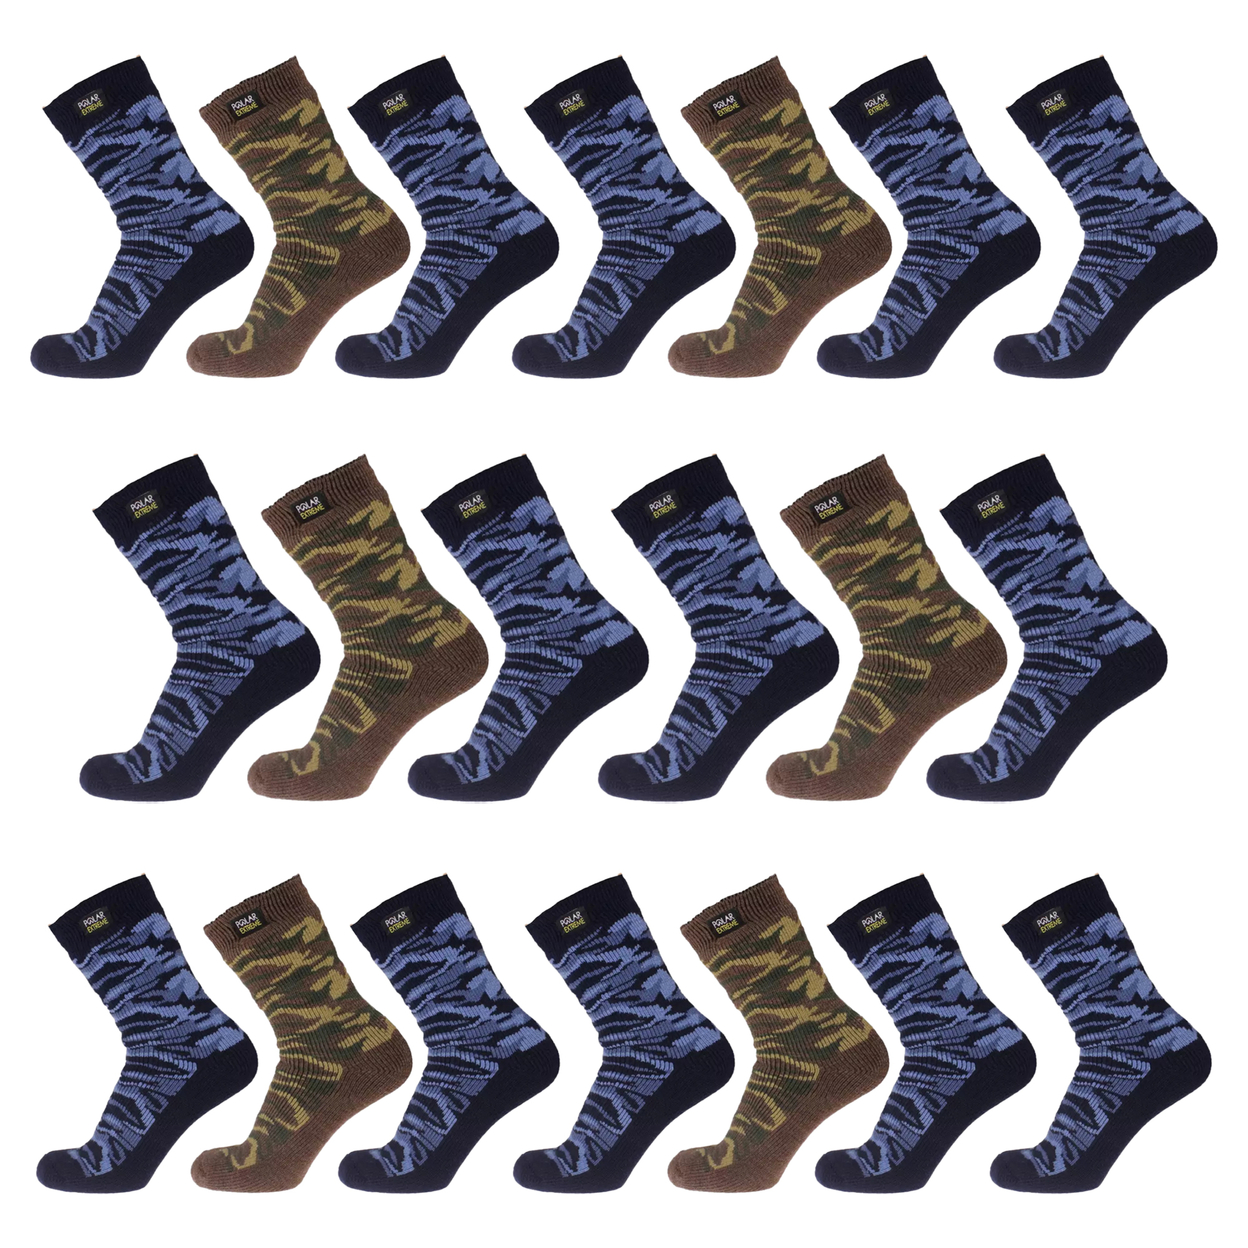 2-Pairs: Men's Polar Extreme Insulated Thermal Ultra-Soft Winter Warm Crew Socks